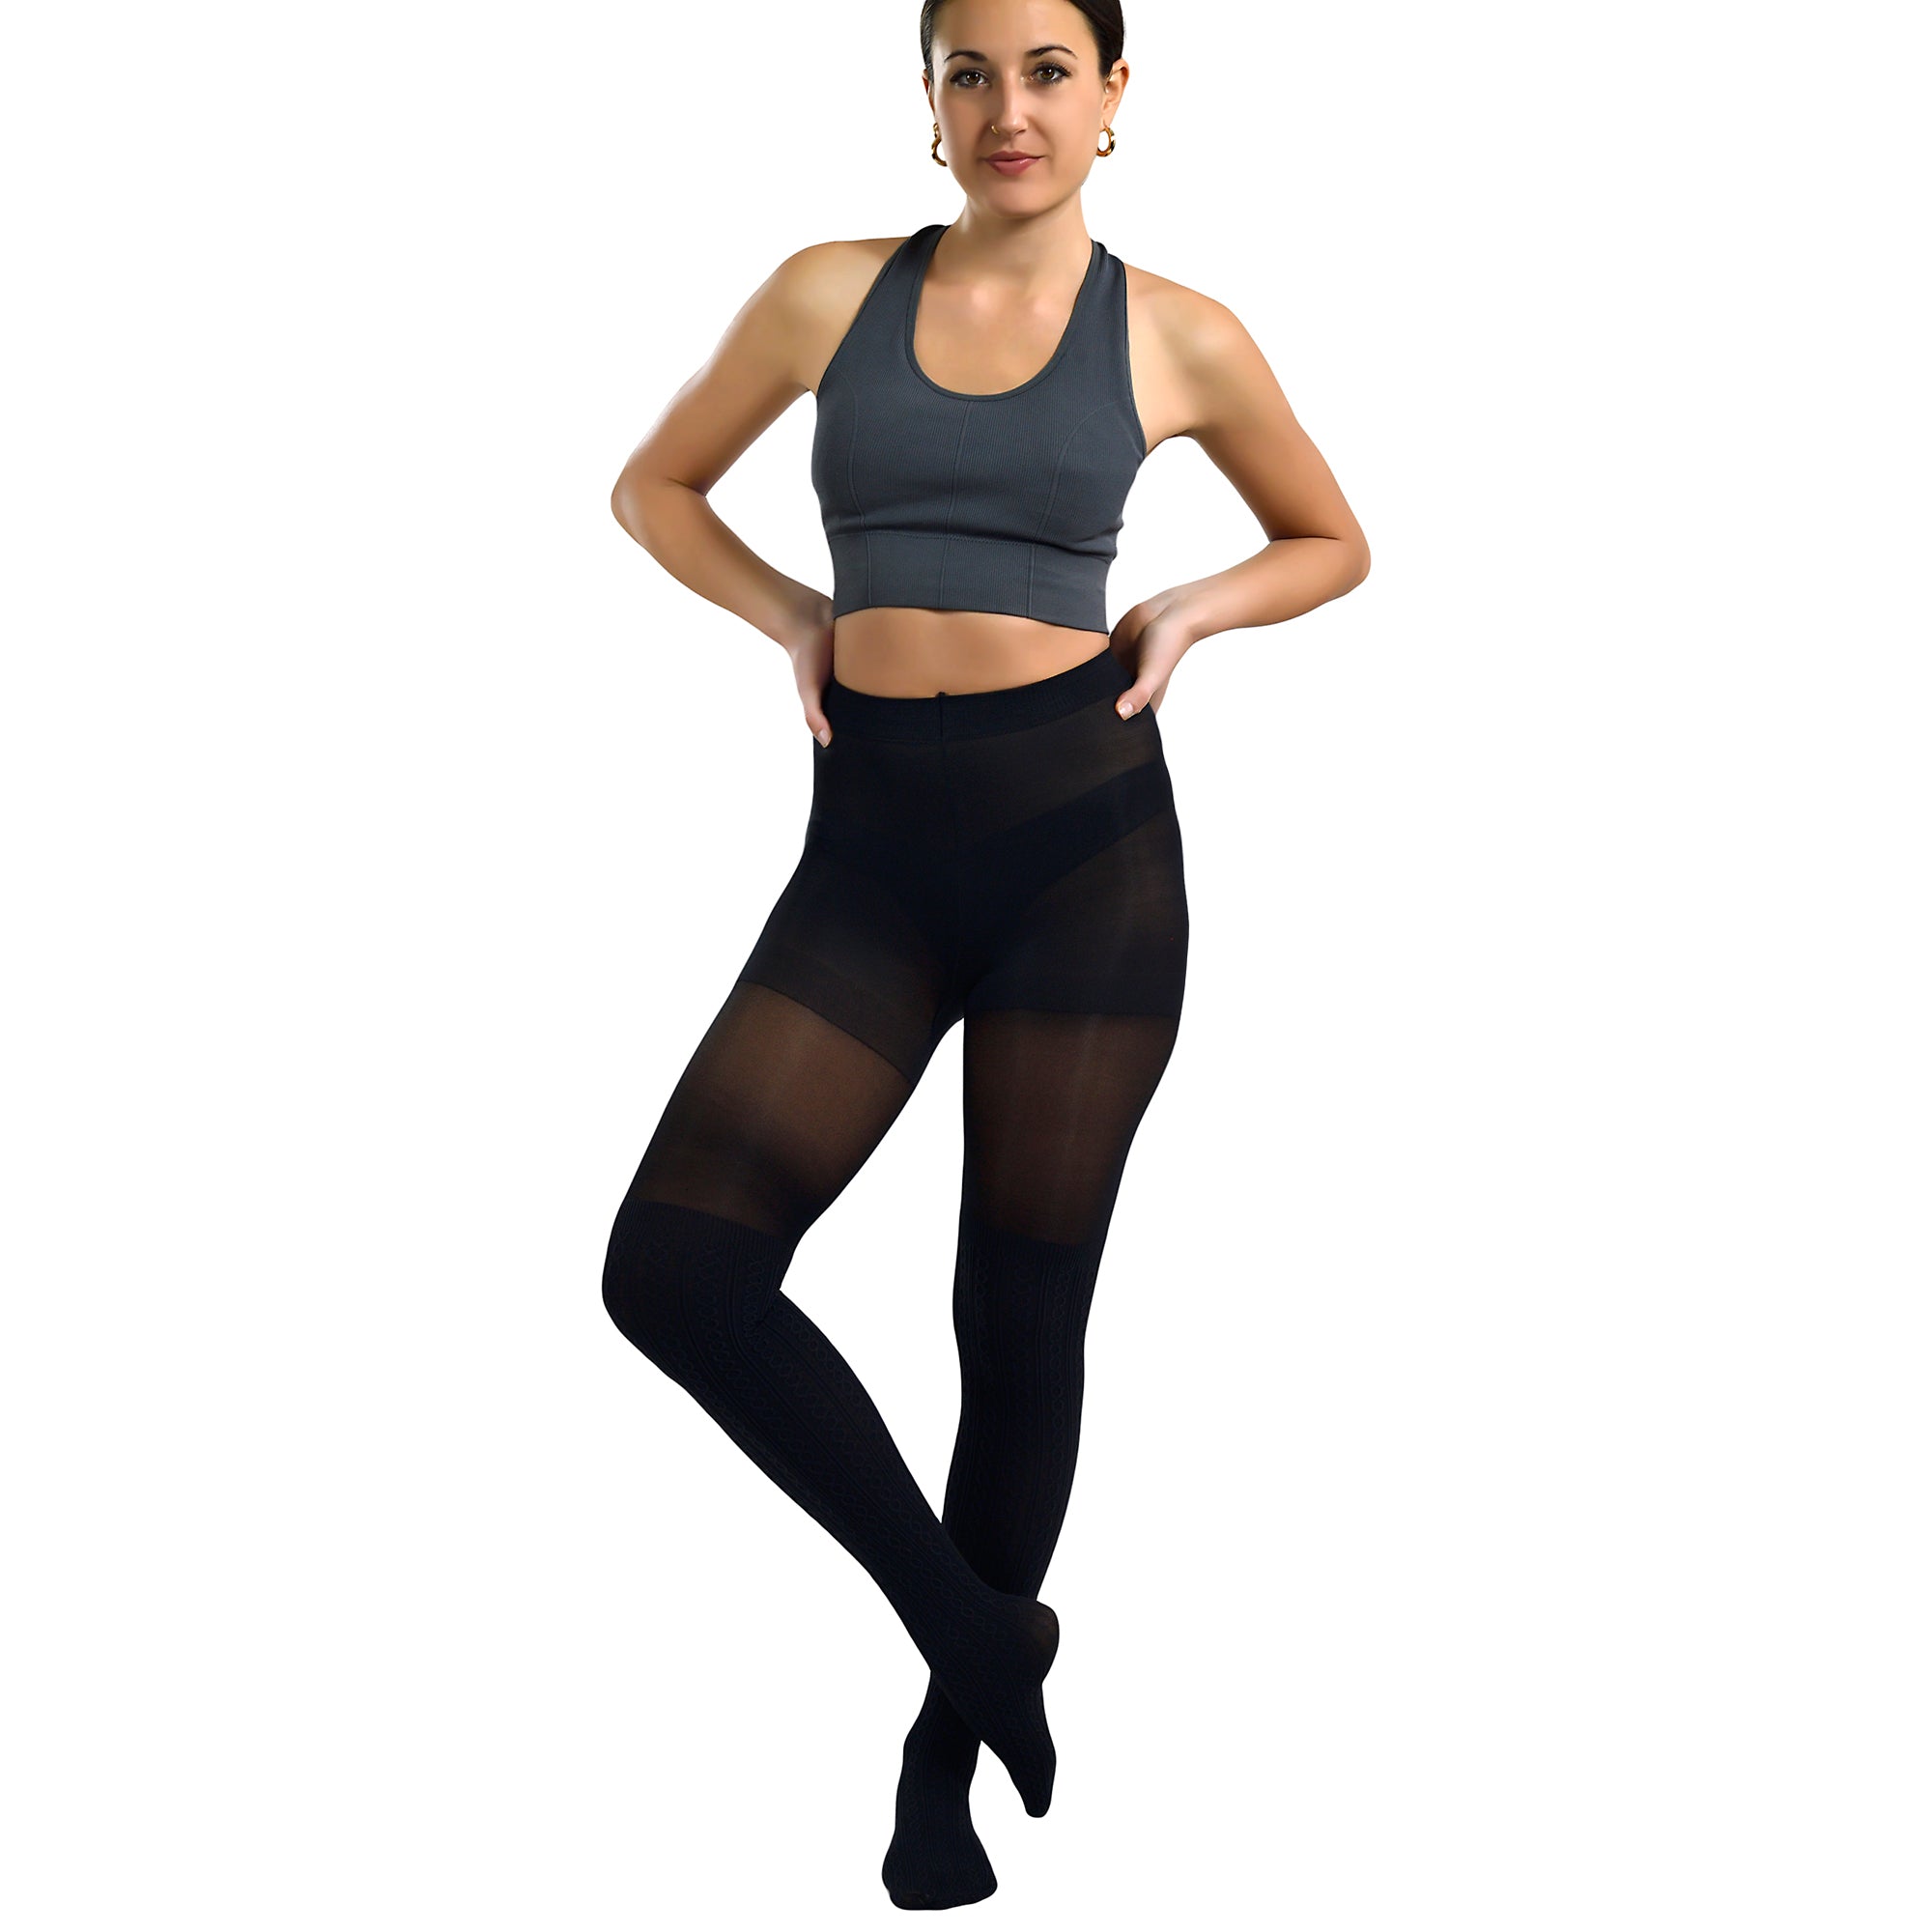 Penti Over Knit Patterned Fashion Tight